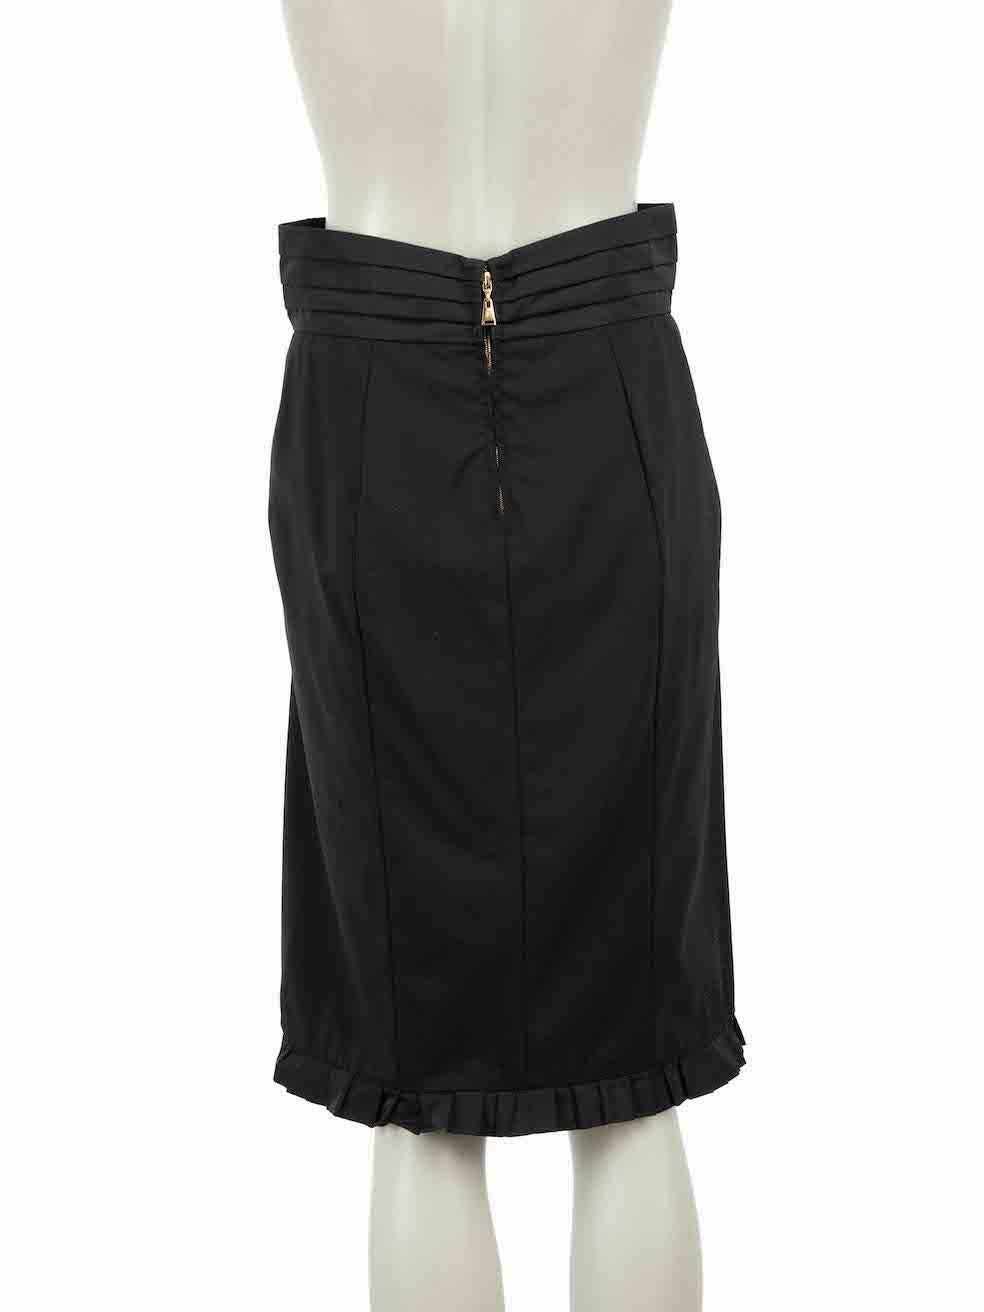 Louis Vuitton Black Ruffle Detail Pencil Skirt Size M In Excellent Condition For Sale In London, GB